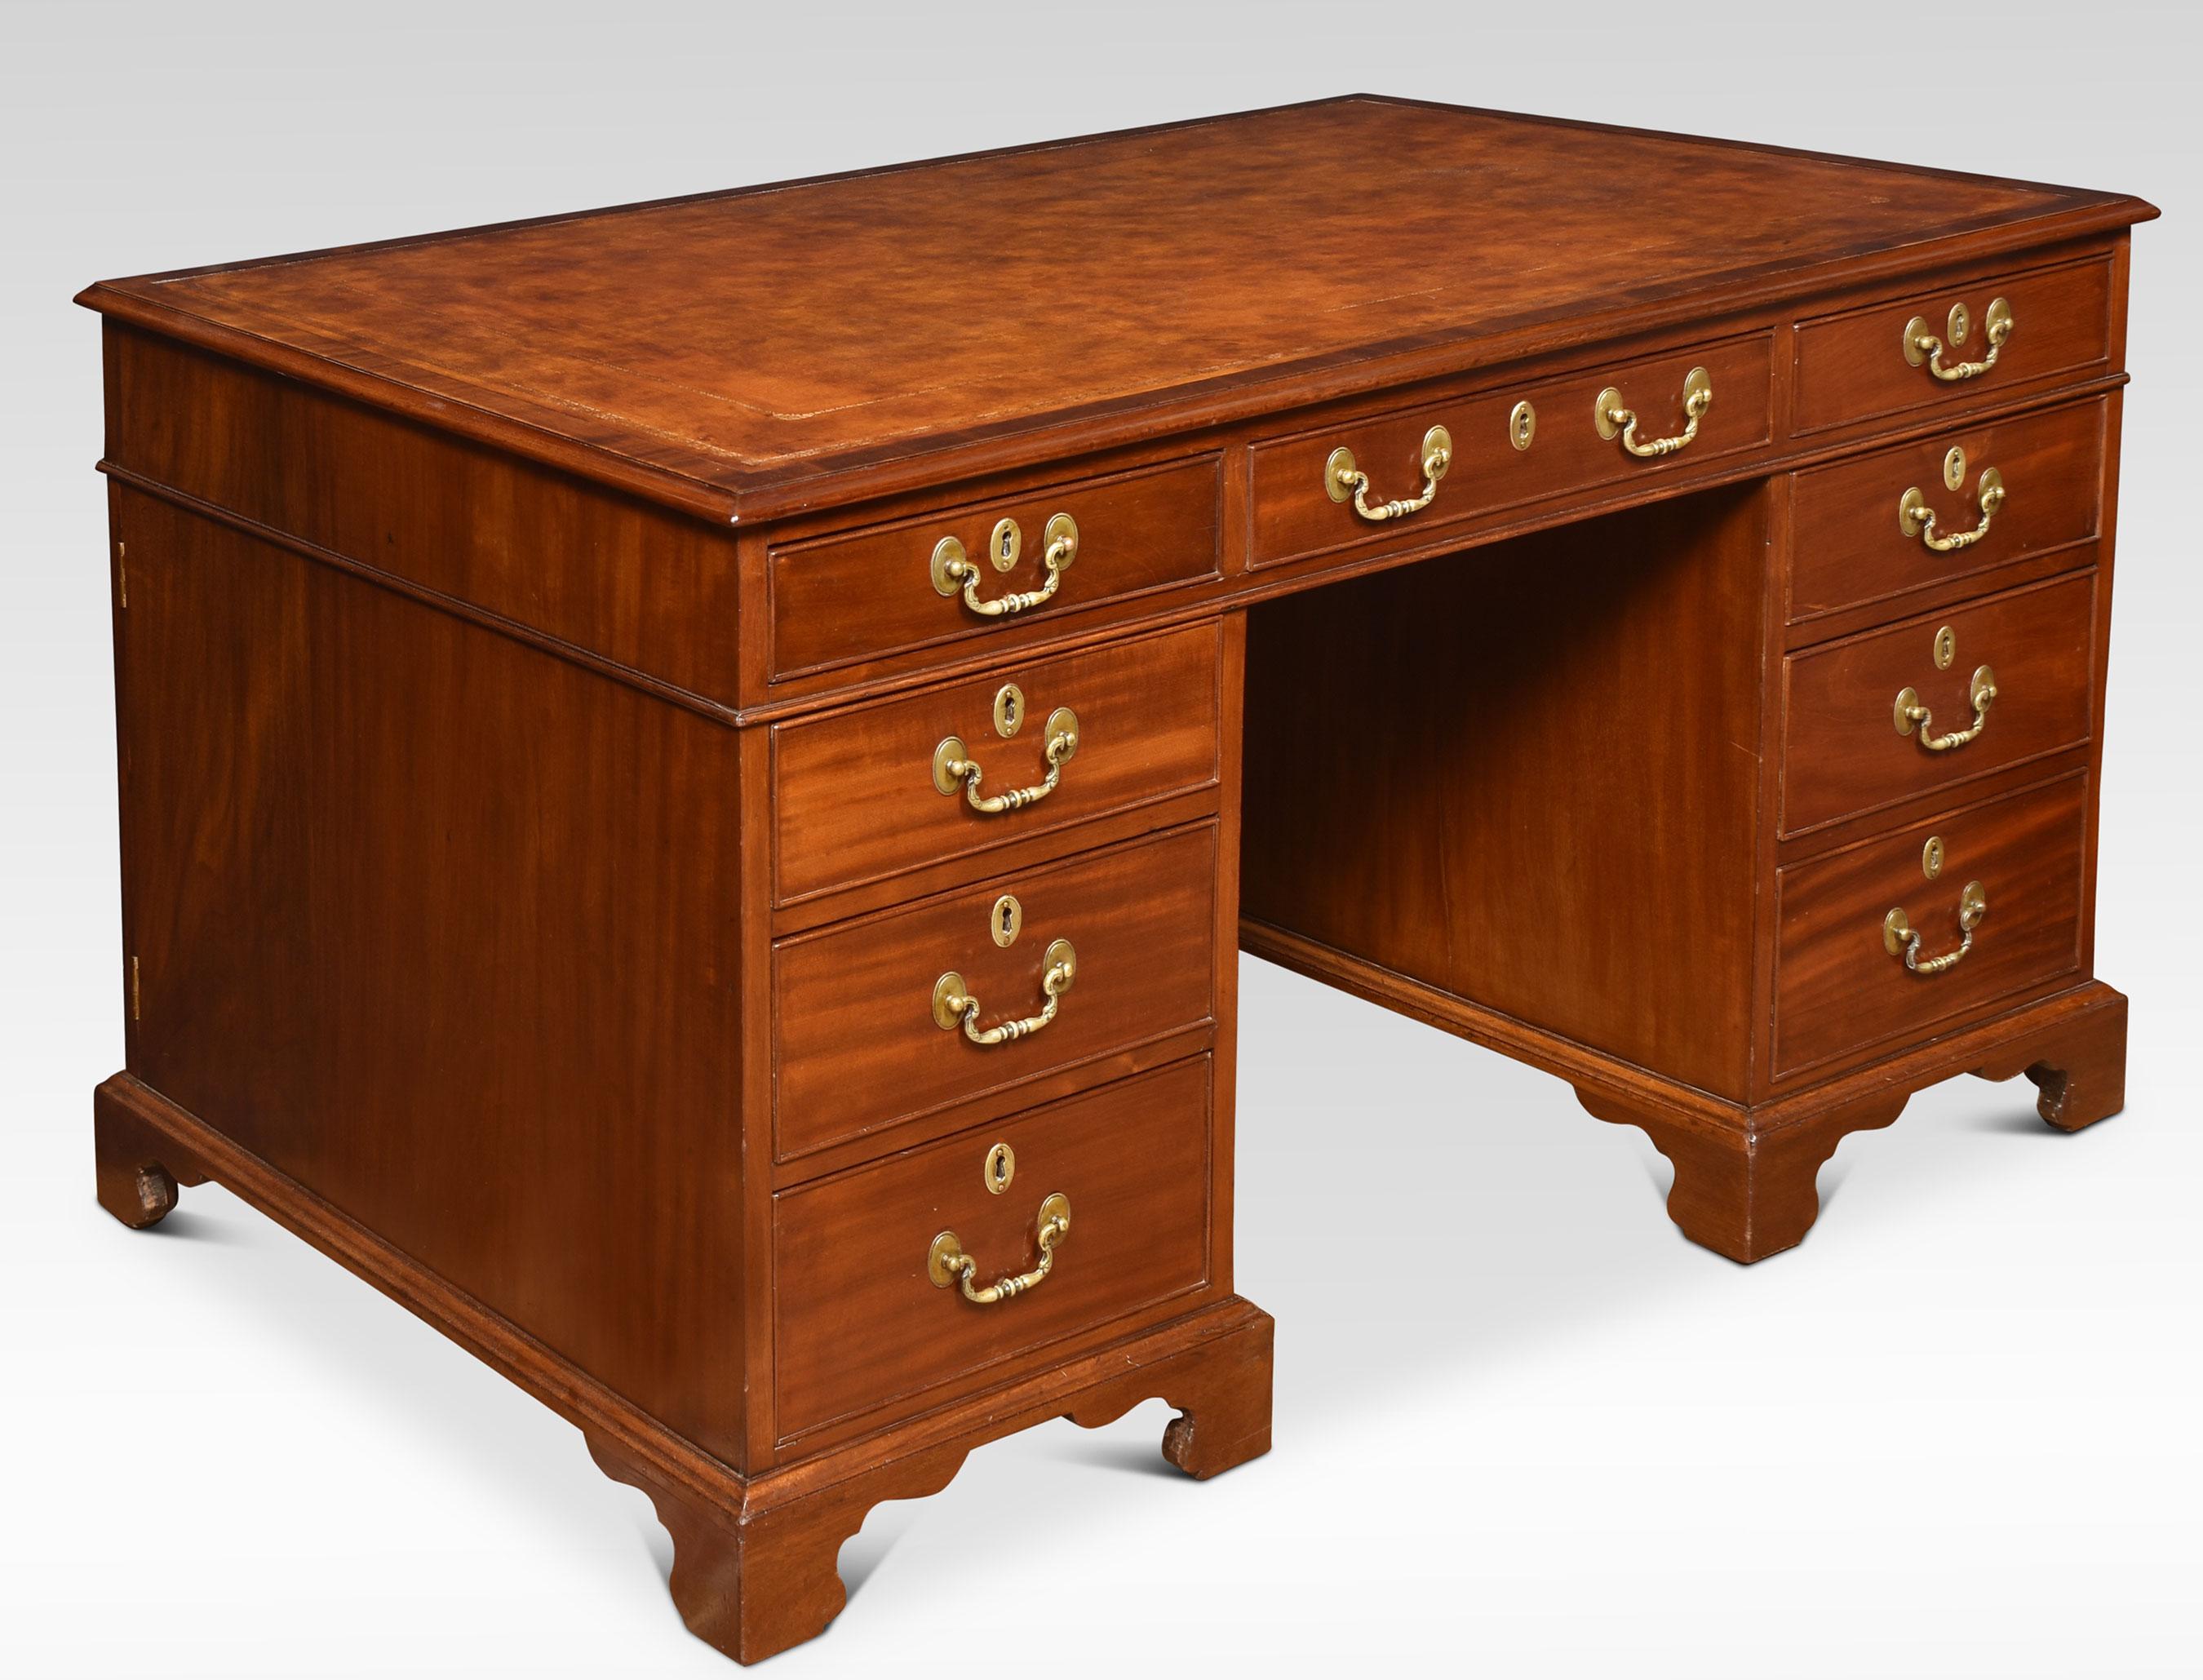 Victorian mahogany partners desk the rectangular top with inset leather having tooled border enclosed by a moulded edge over an arrangement of three freeze drawers. Above two pedestals one side with two banks of three drawers the opposing side